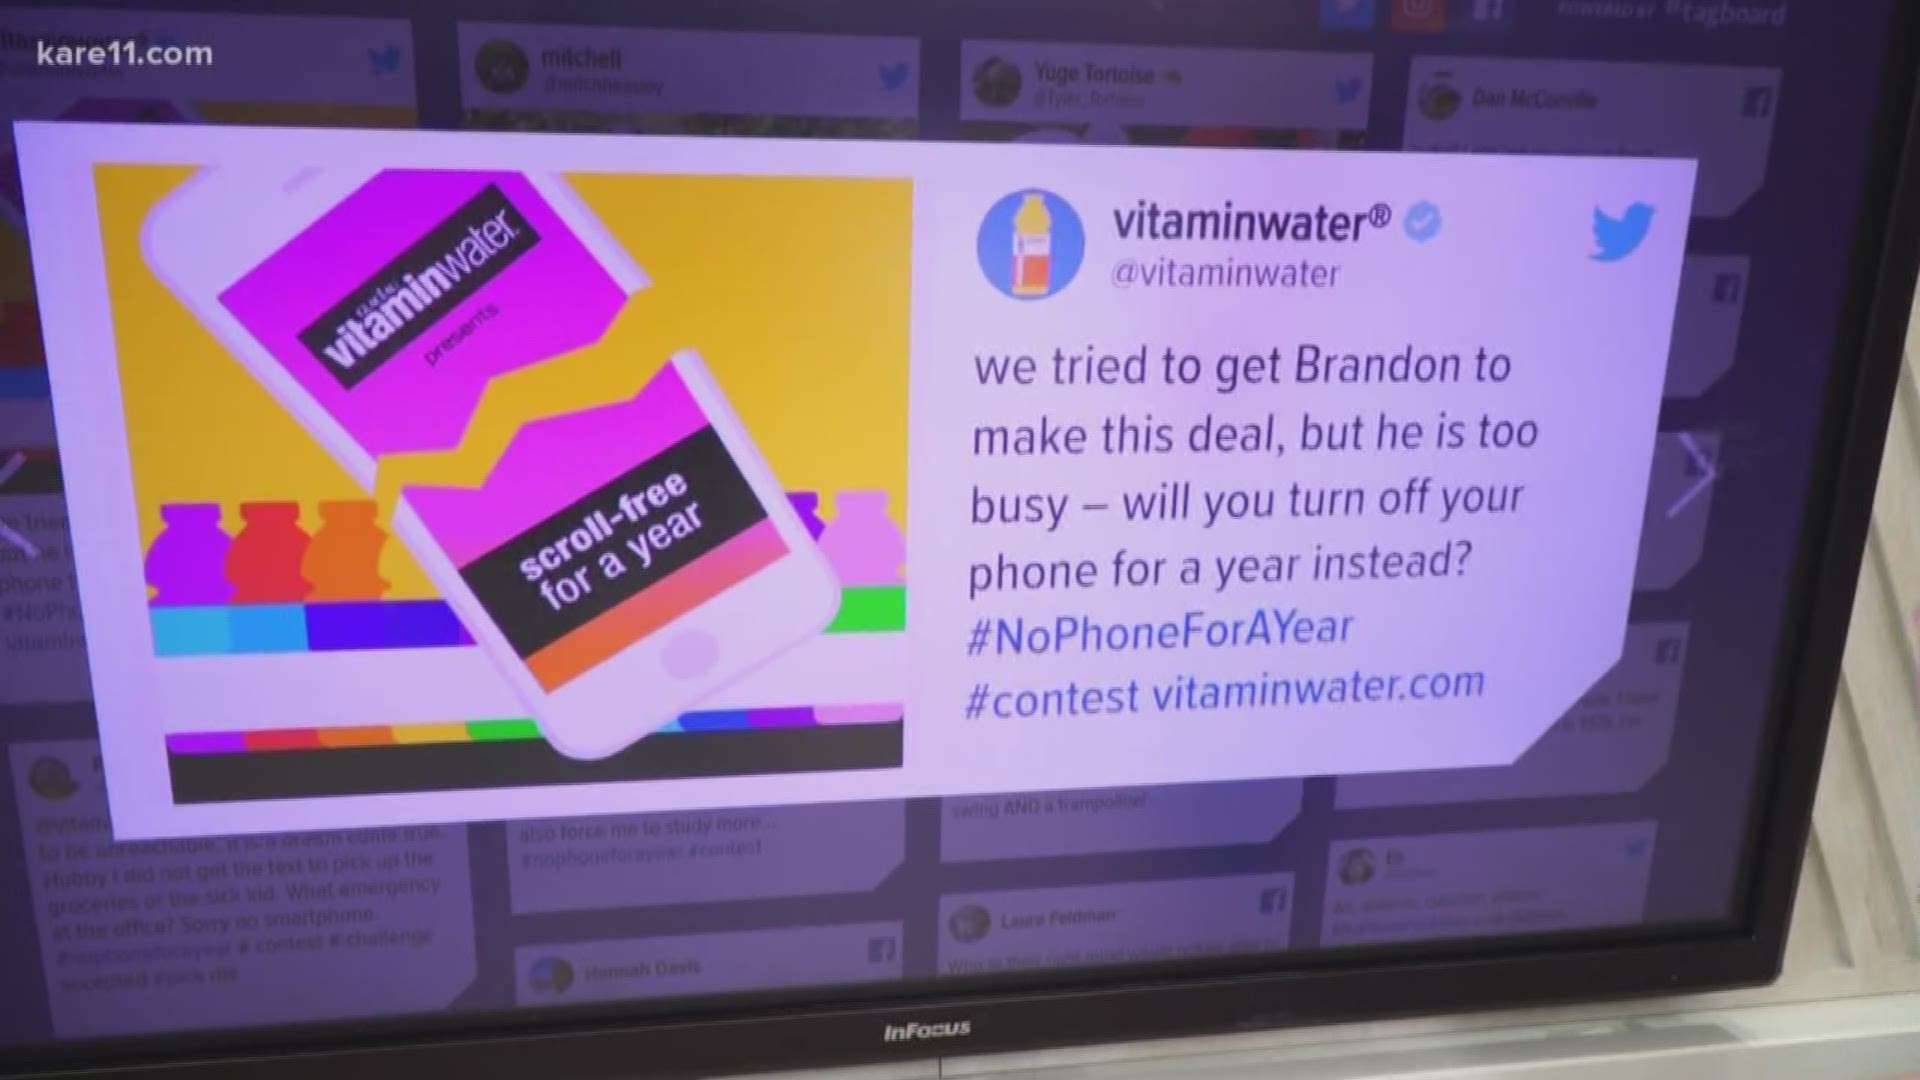 Vitaminwater is holding a contest for one brave soul to ditch his or her smartphone for a year. If that person can make it 365 days without using a smartphone, he or she will receive $100,000. kare11.tv/2BdYfrD